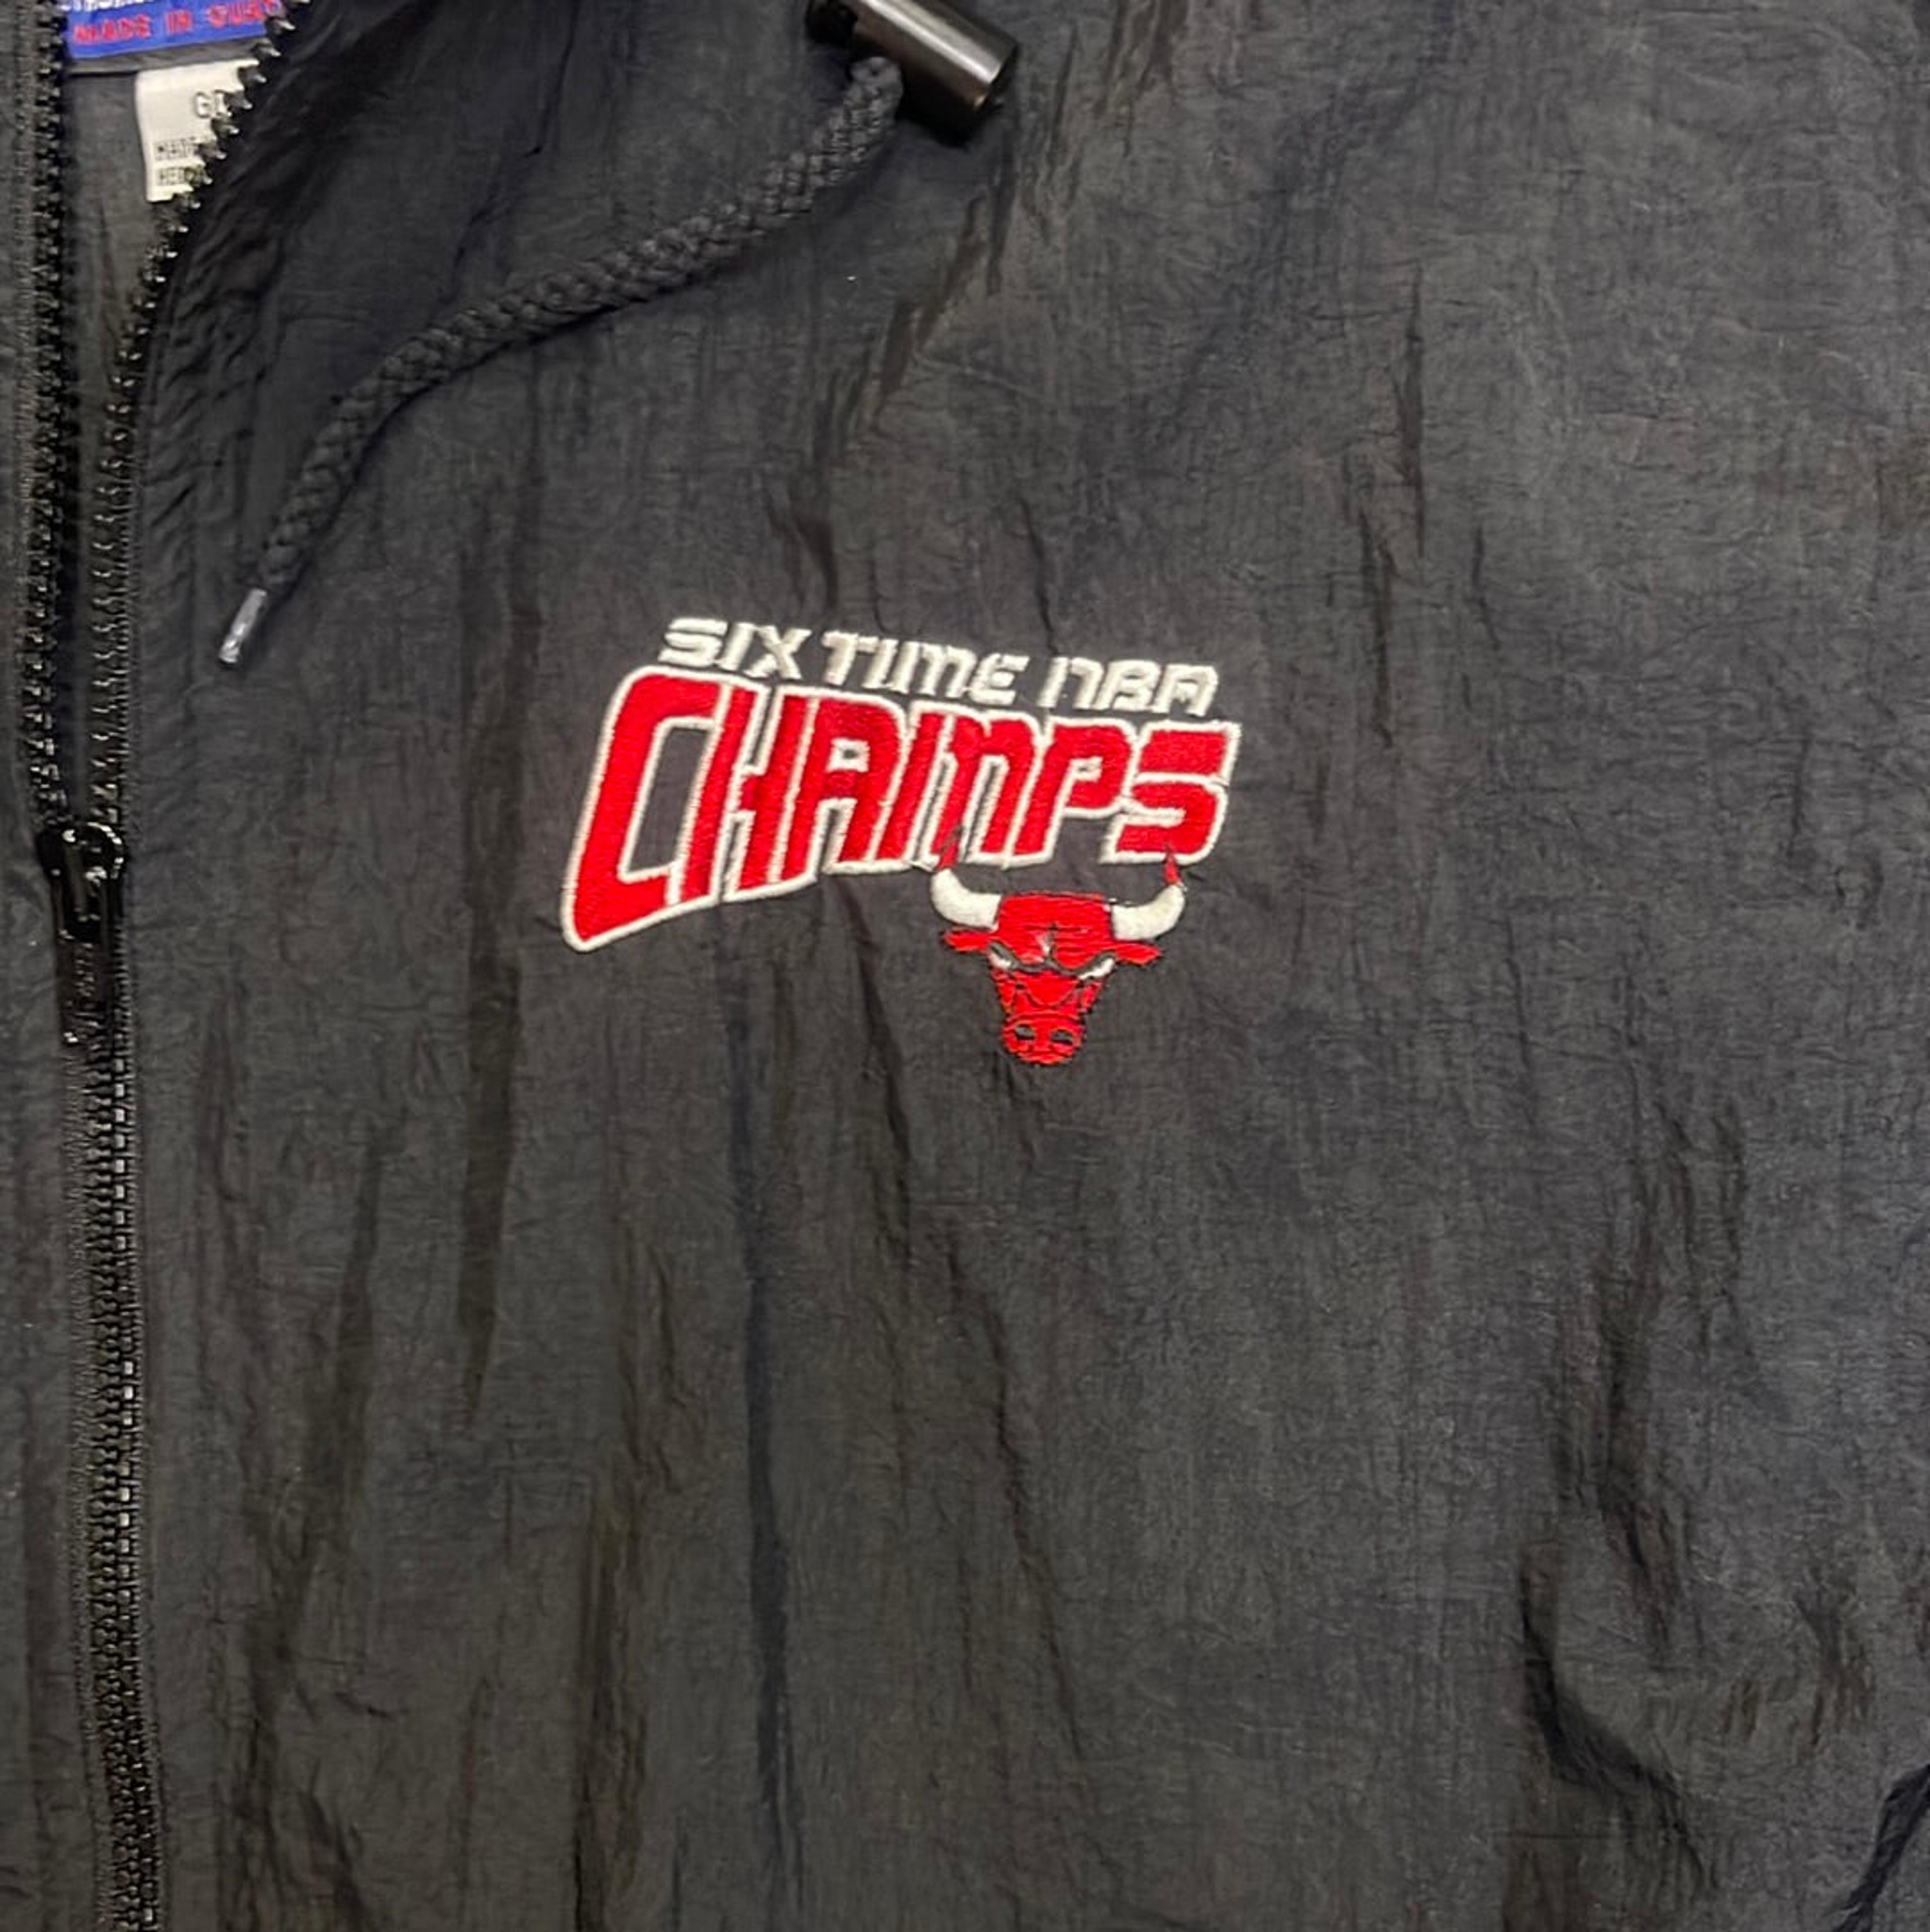 Alternate View 1 of Vintage NBA Chicago Bulls Five-Time Champs Pro Player Windbreake